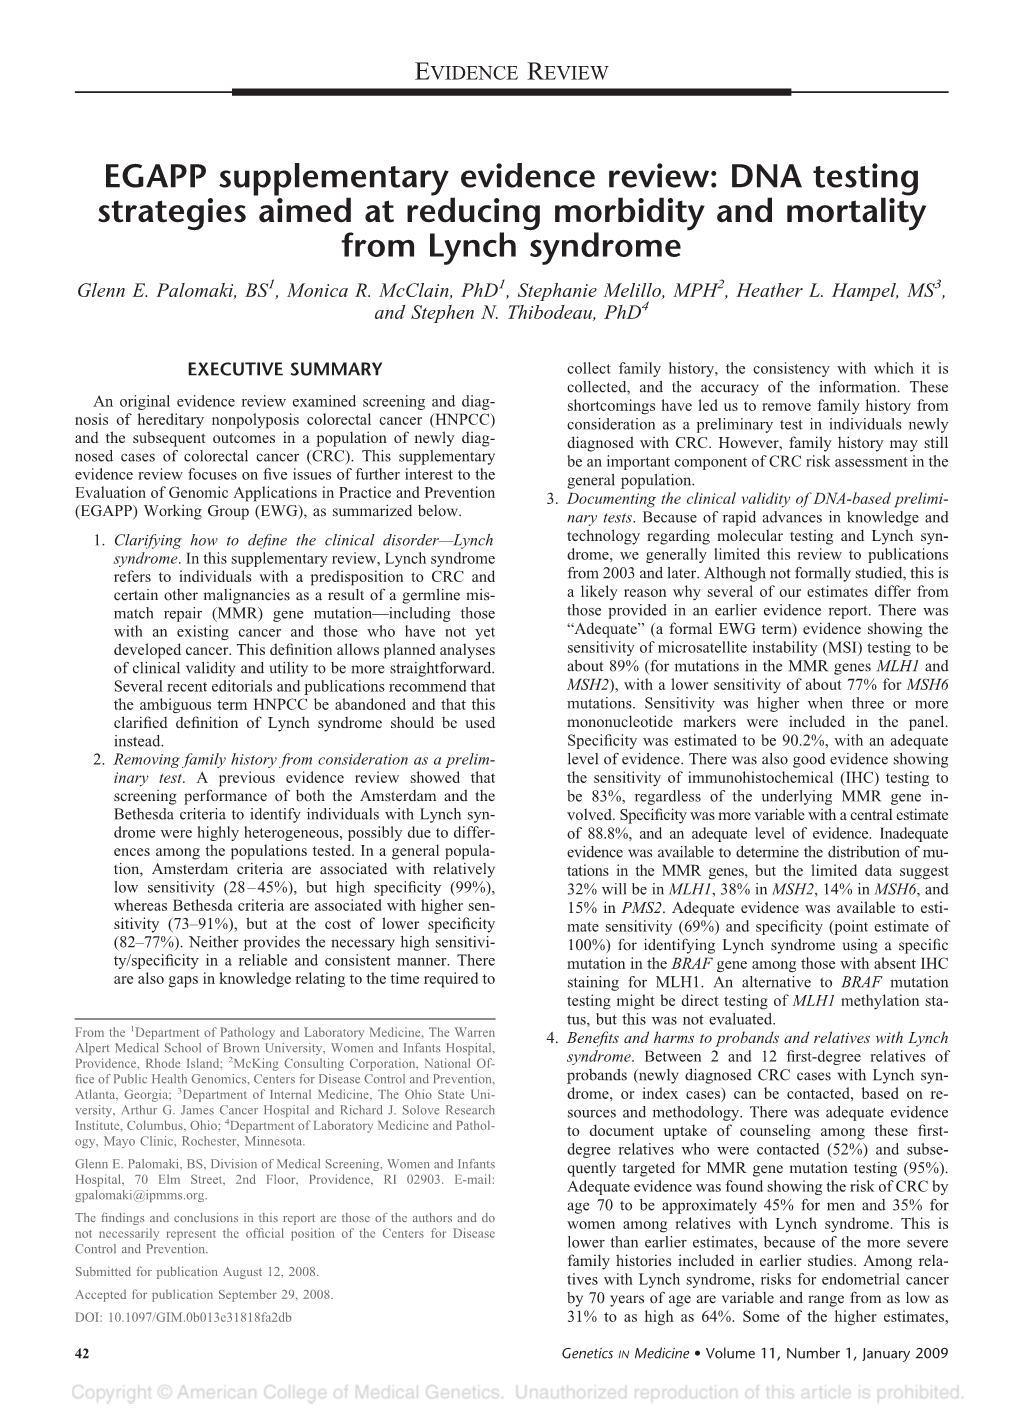 EGAPP Supplementary Evidence Review: DNA Testing Strategies Aimed at Reducing Morbidity and Mortality from Lynch Syndrome Glenn E